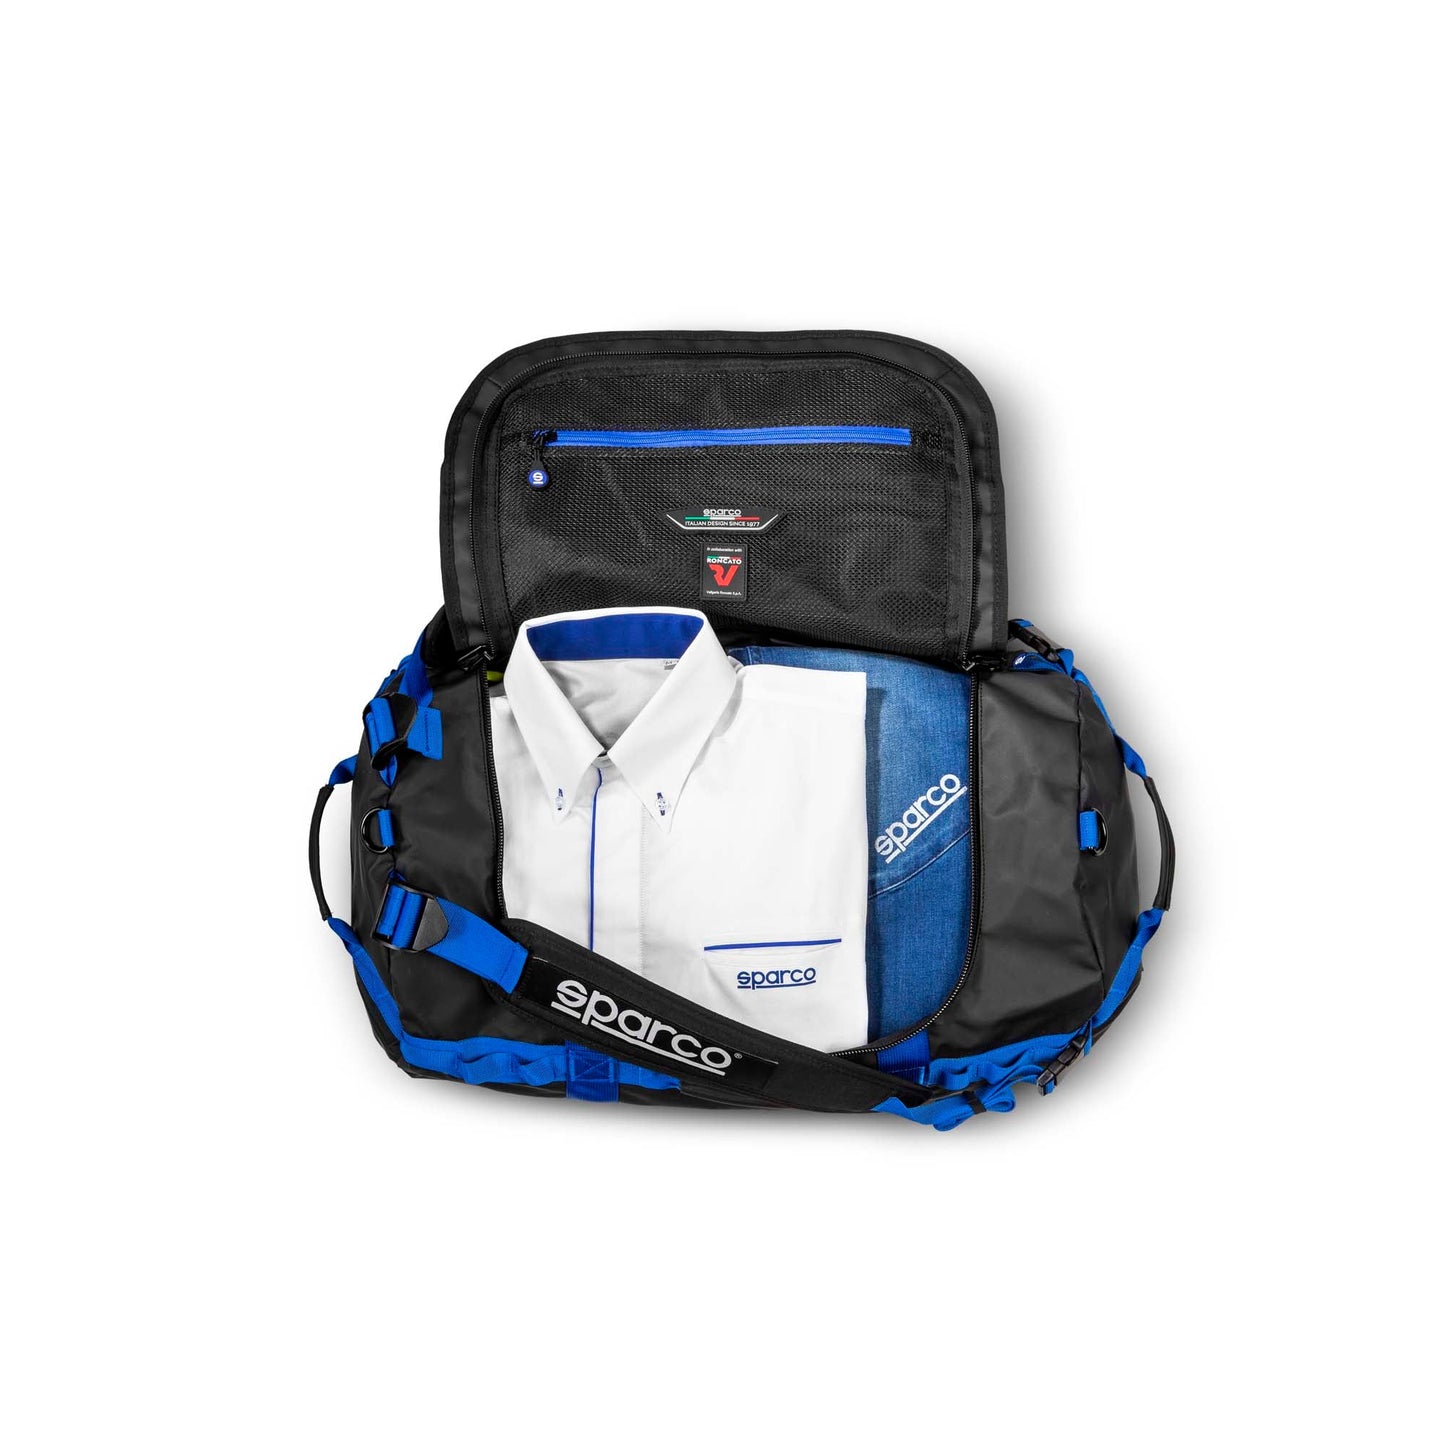 Sparco Small Duffle Bag - Small